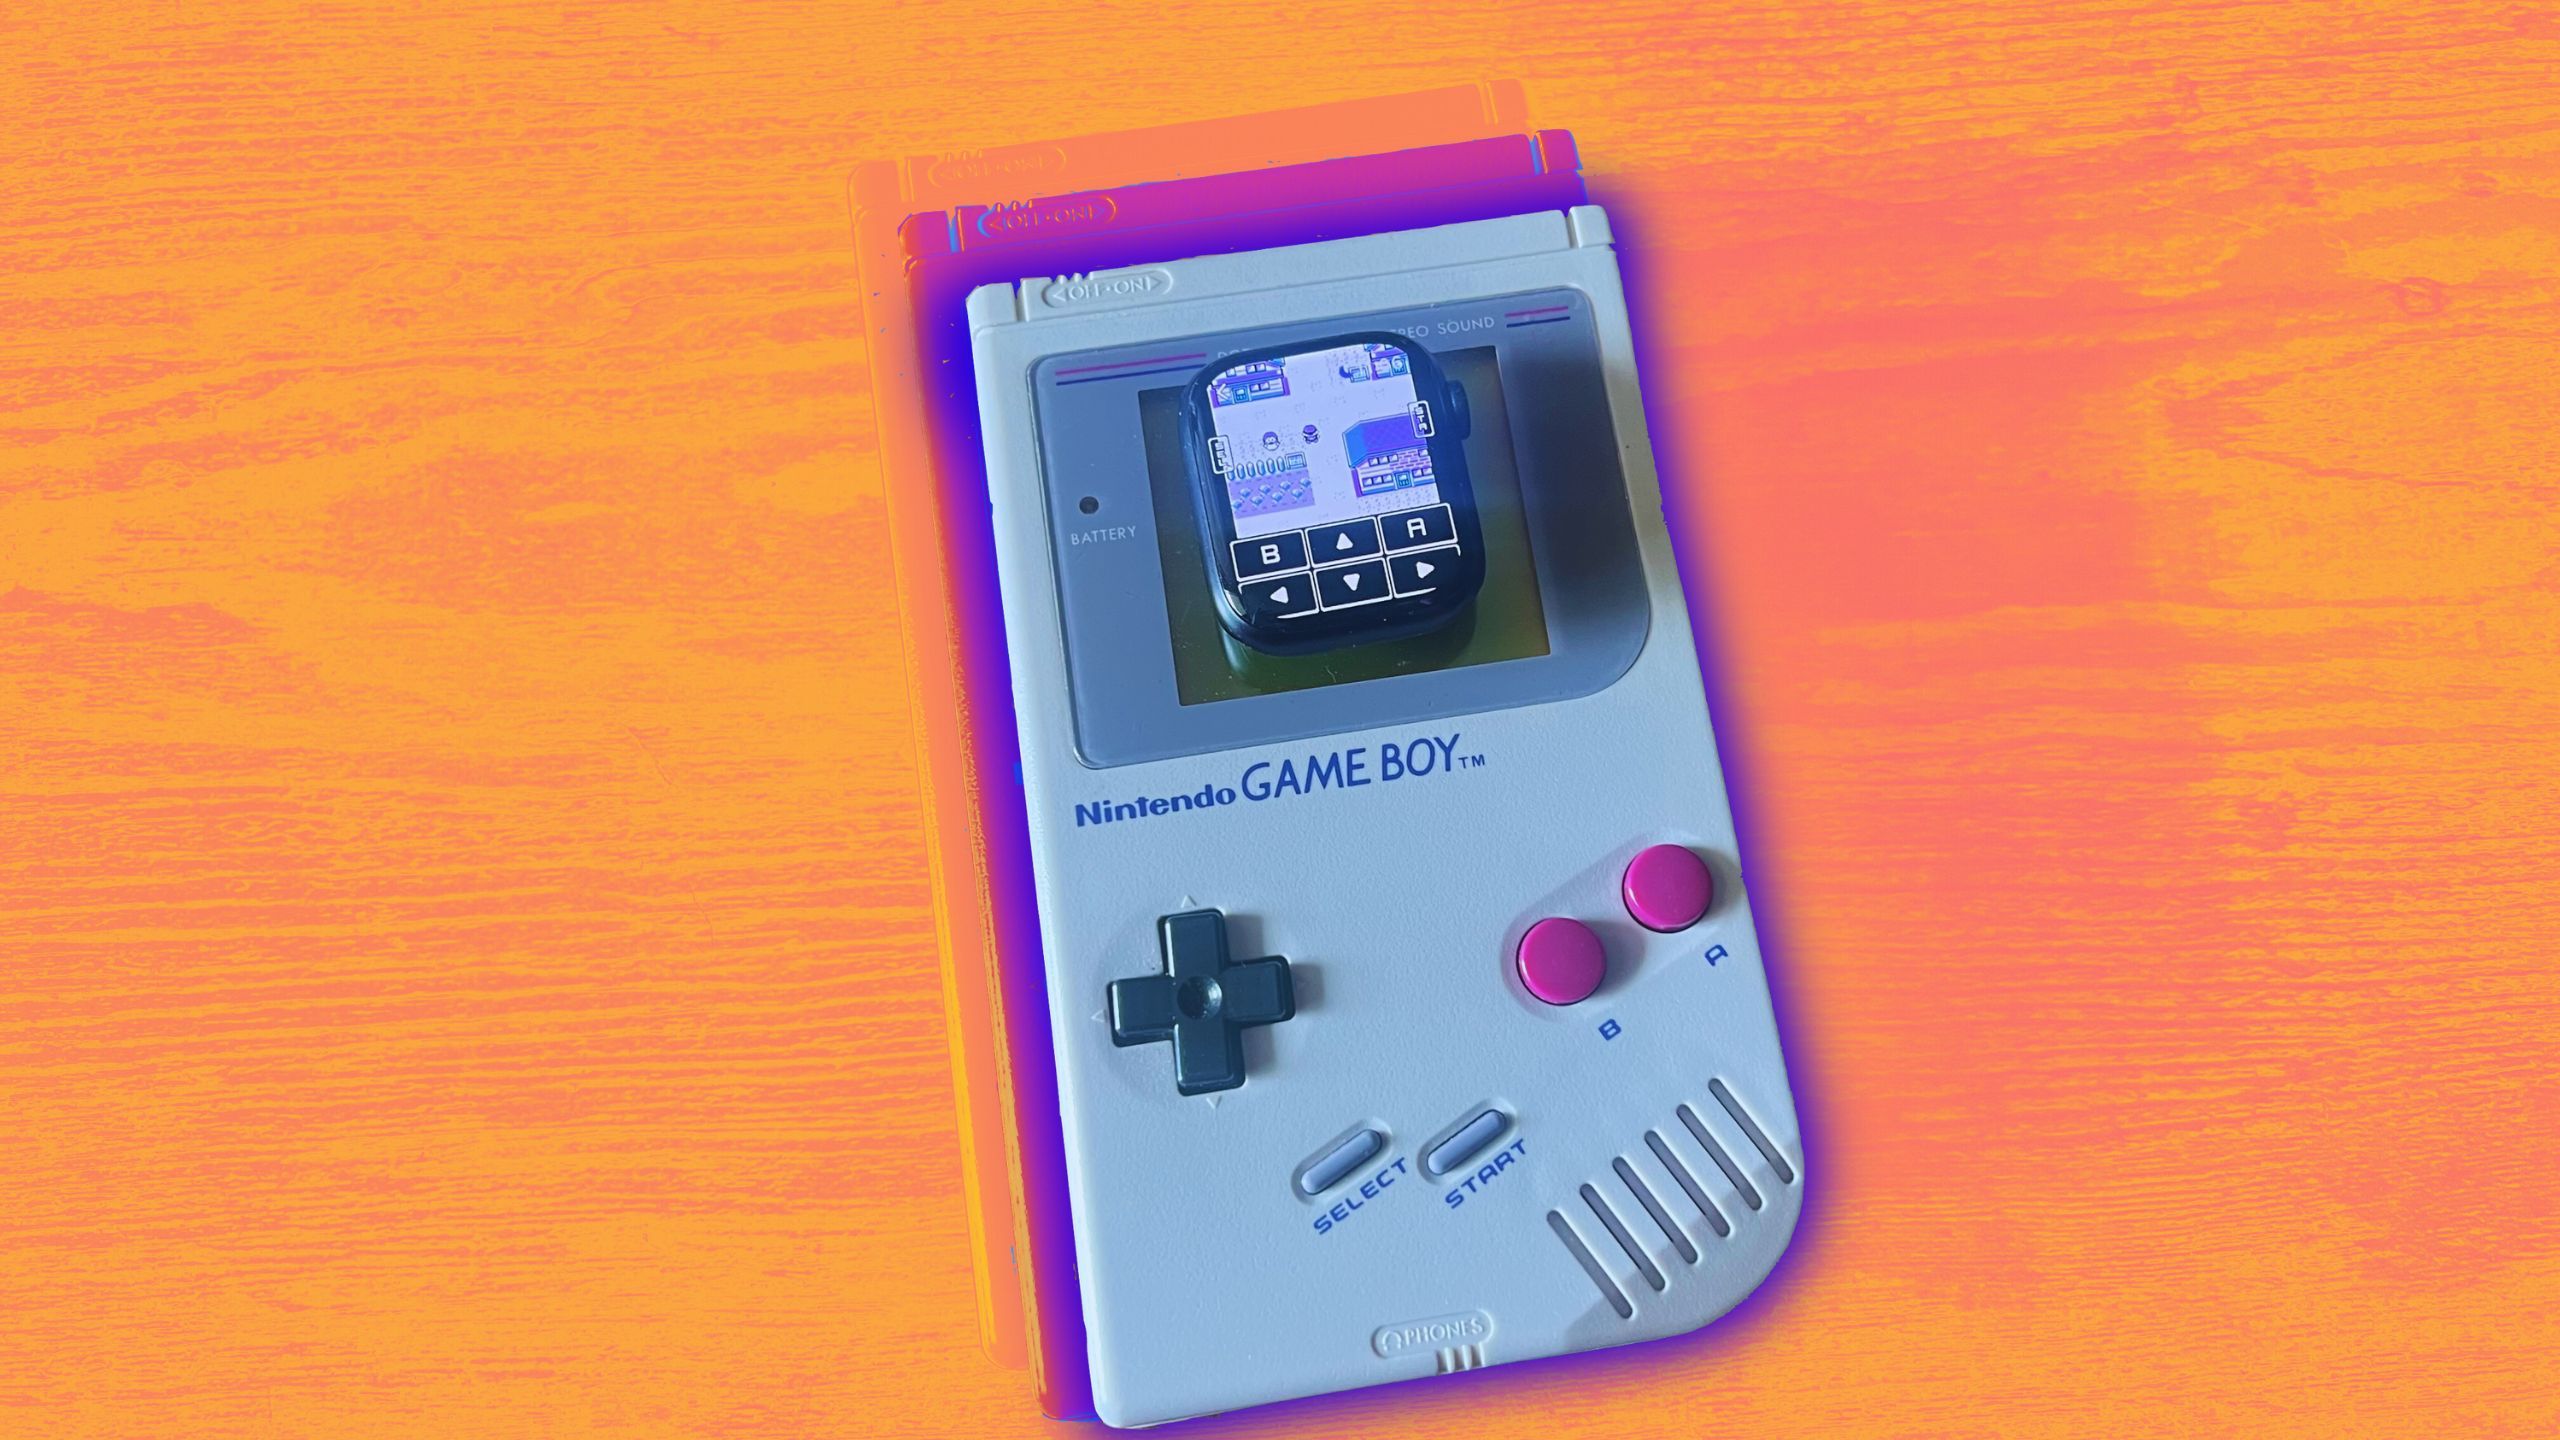 You can now emulate Game Boy games on your Apple Watch,